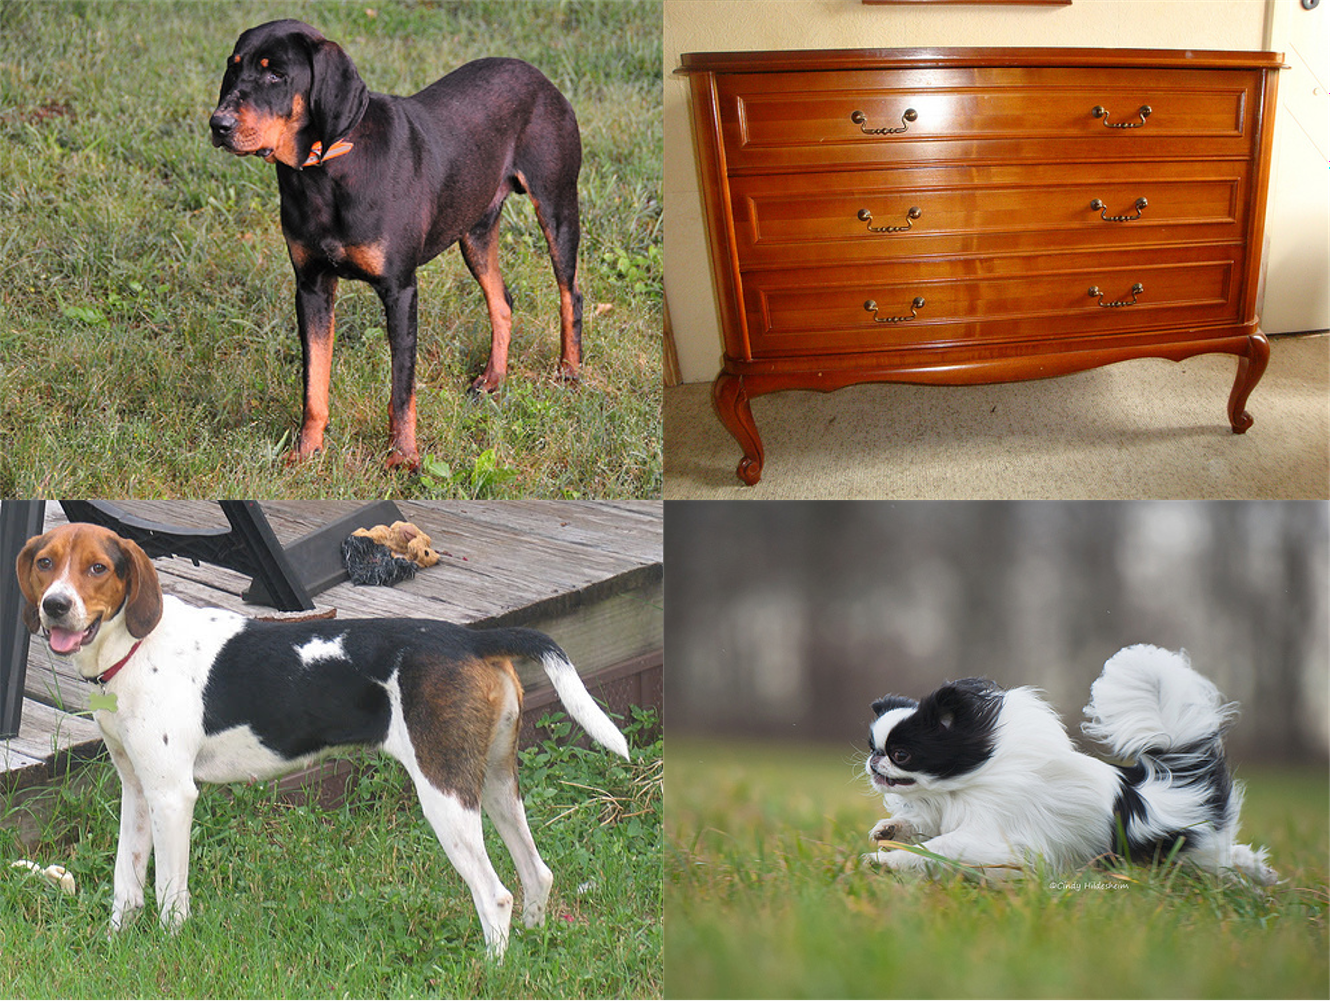 The hardest categories to mimic. ImageNet images clockwise from top left: black-and-tan coonhound, chiffonier, Japanese spaniel, English foxhound.